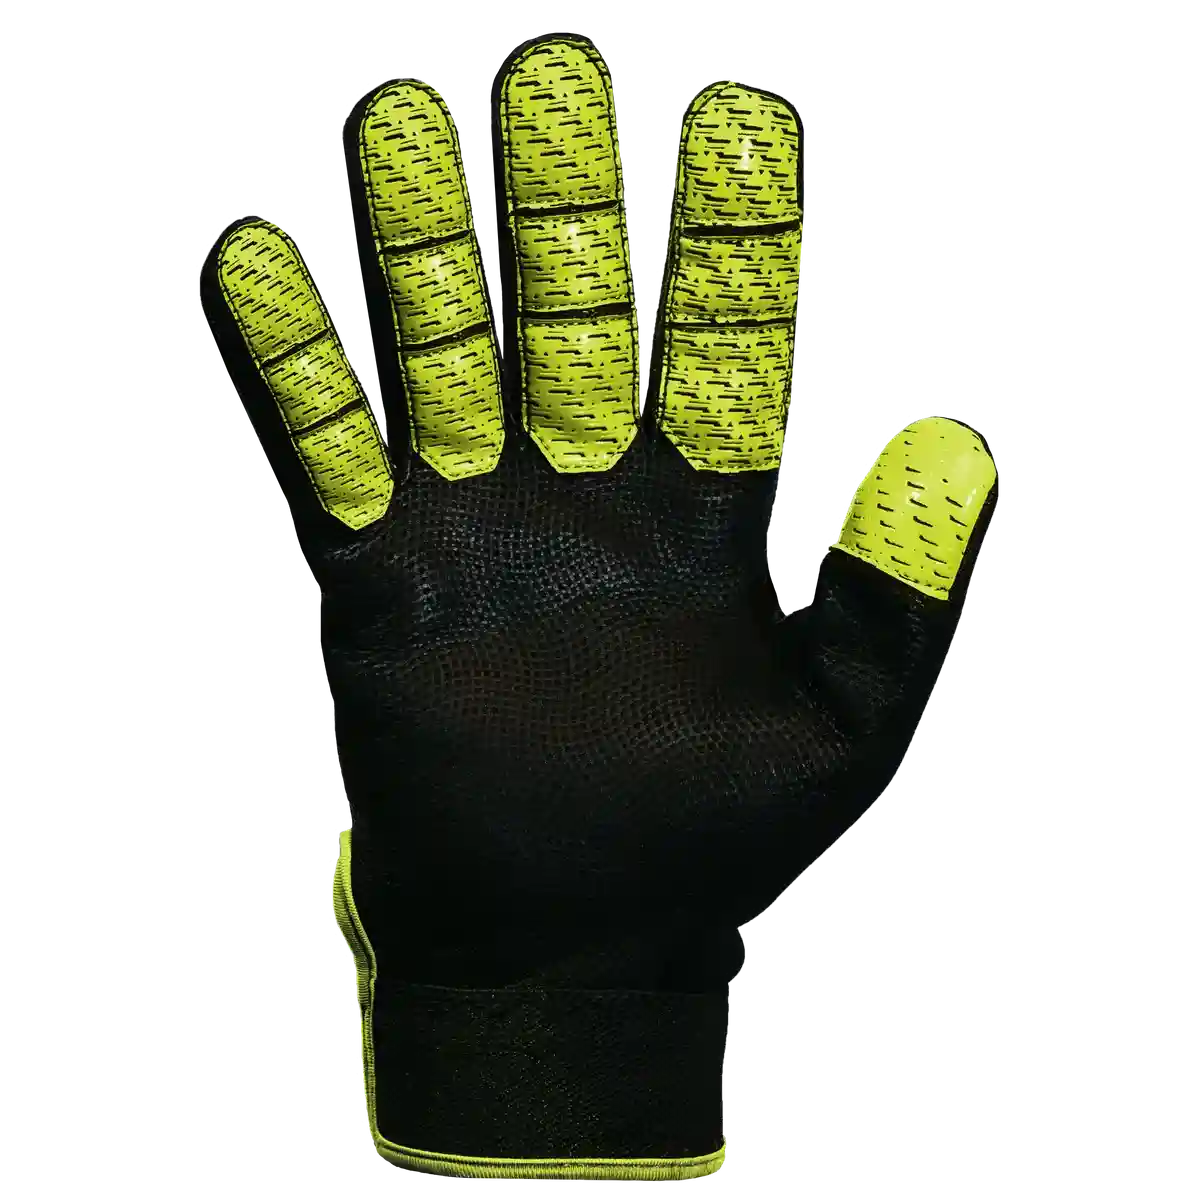 FG Softball Cold Weather Throwing Glove